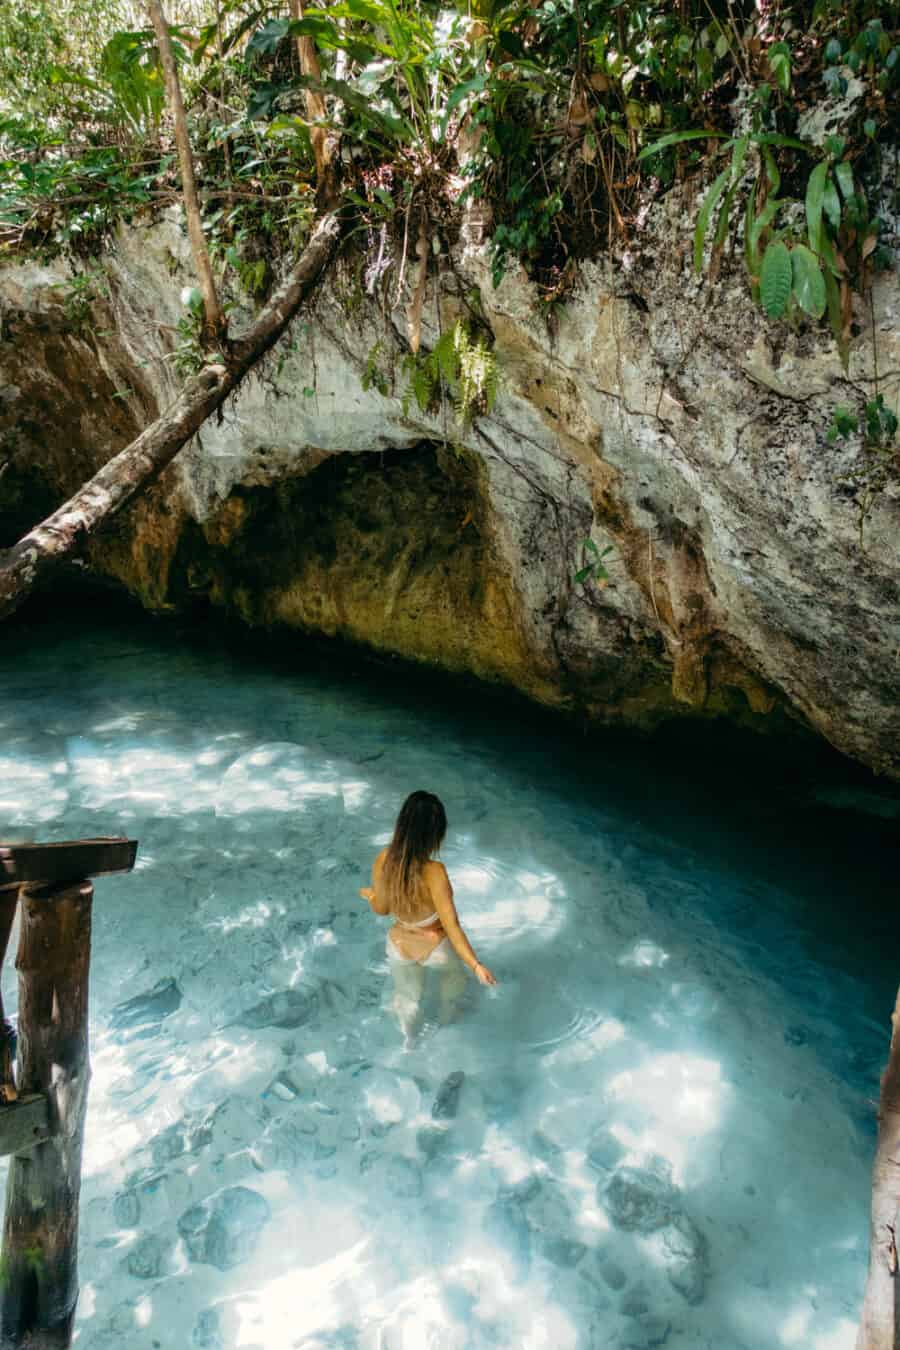 Coco Tran — Aesthetic Travel Blog By Film Photographer Coco Tran https://cocotran.com/safest-parts-of-mexico/